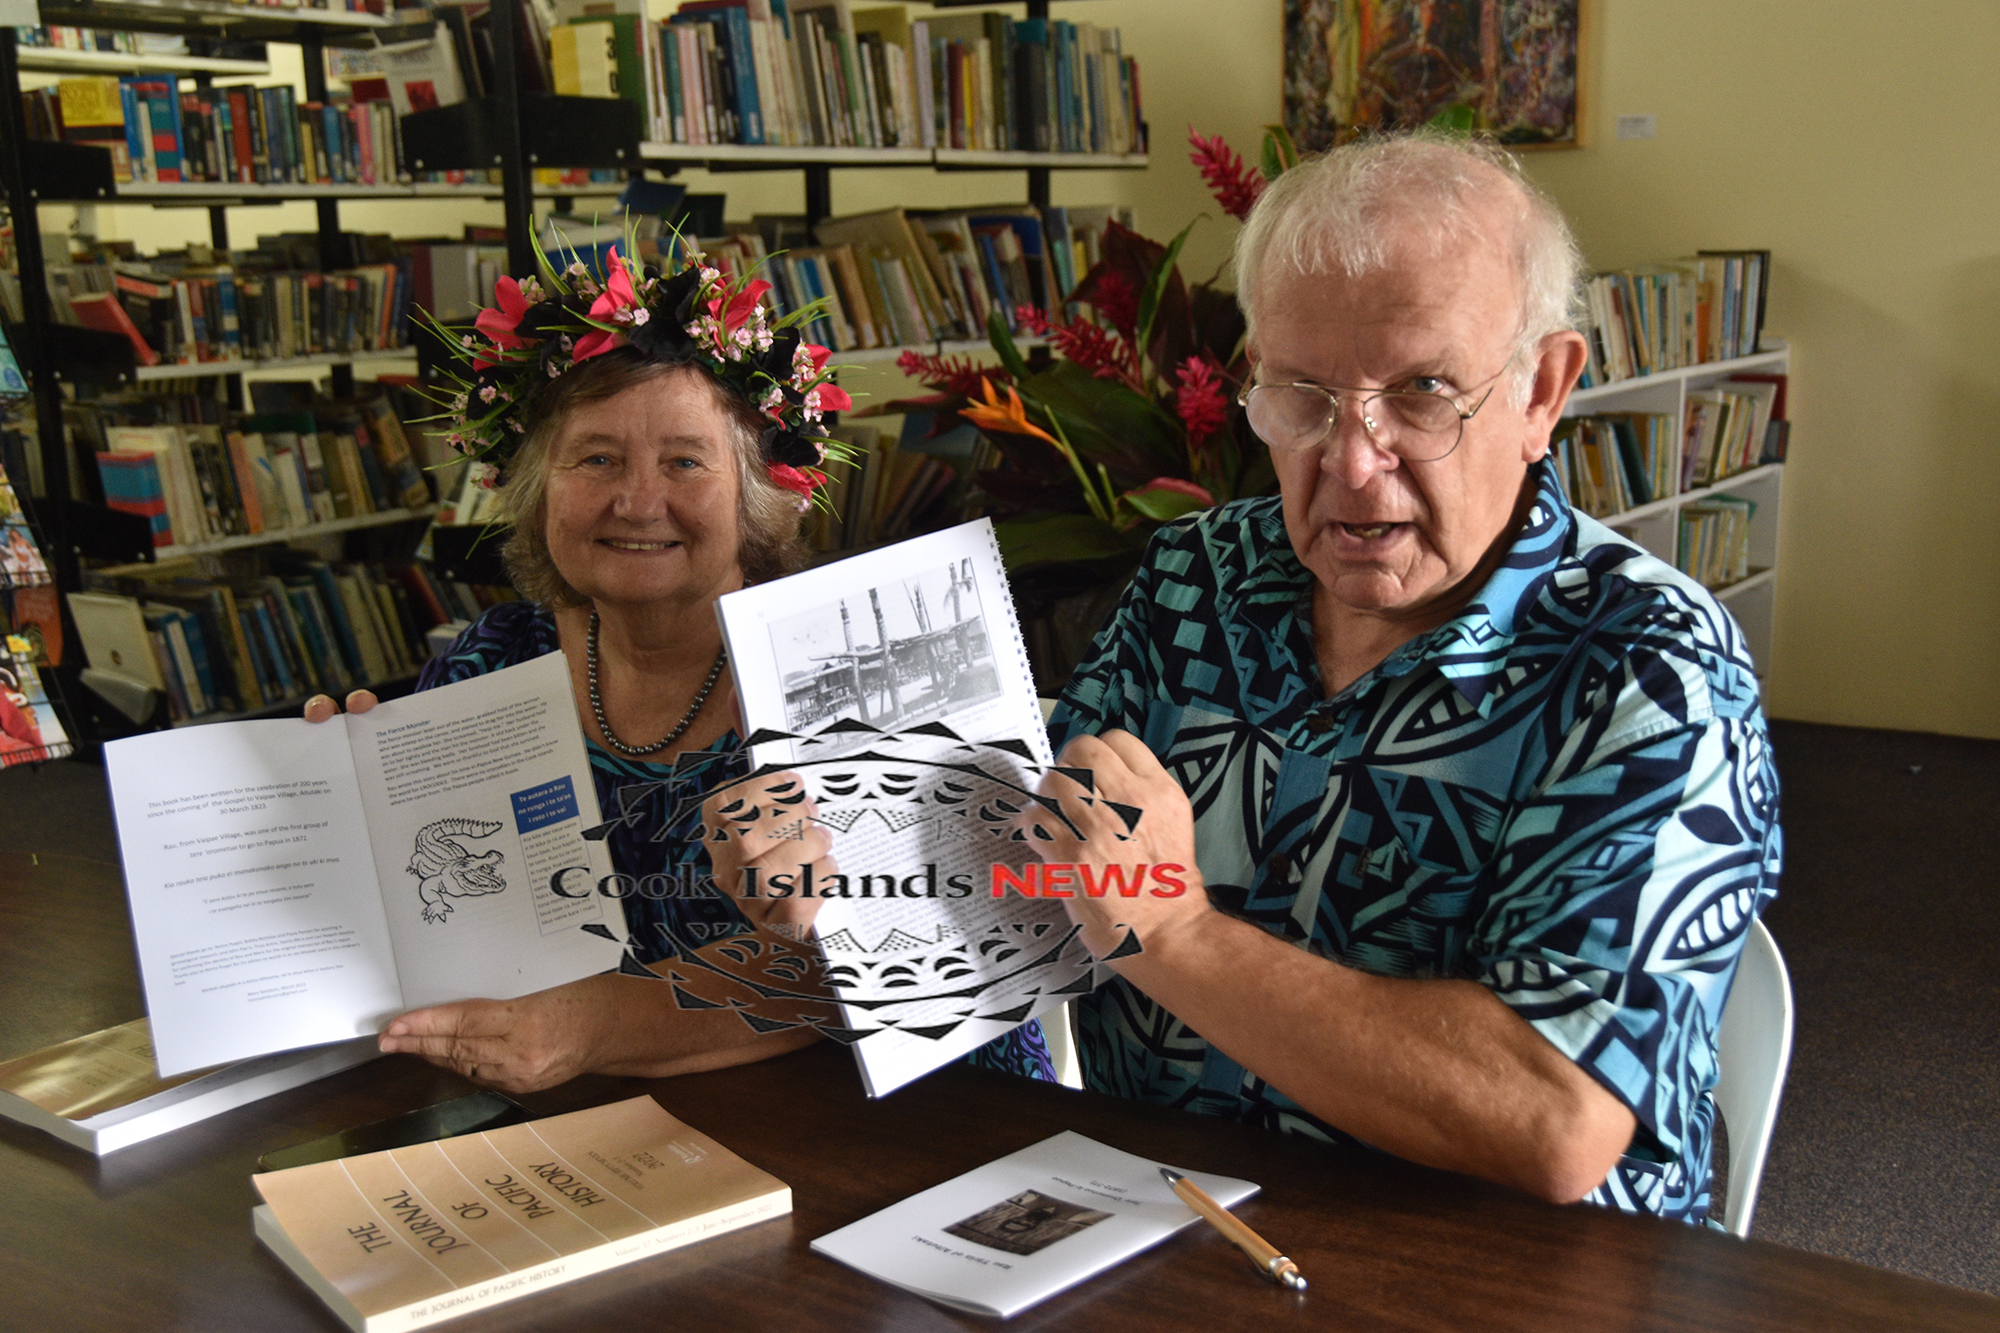 Journal featuring writings of Aitutakian Missionary donated to National Library